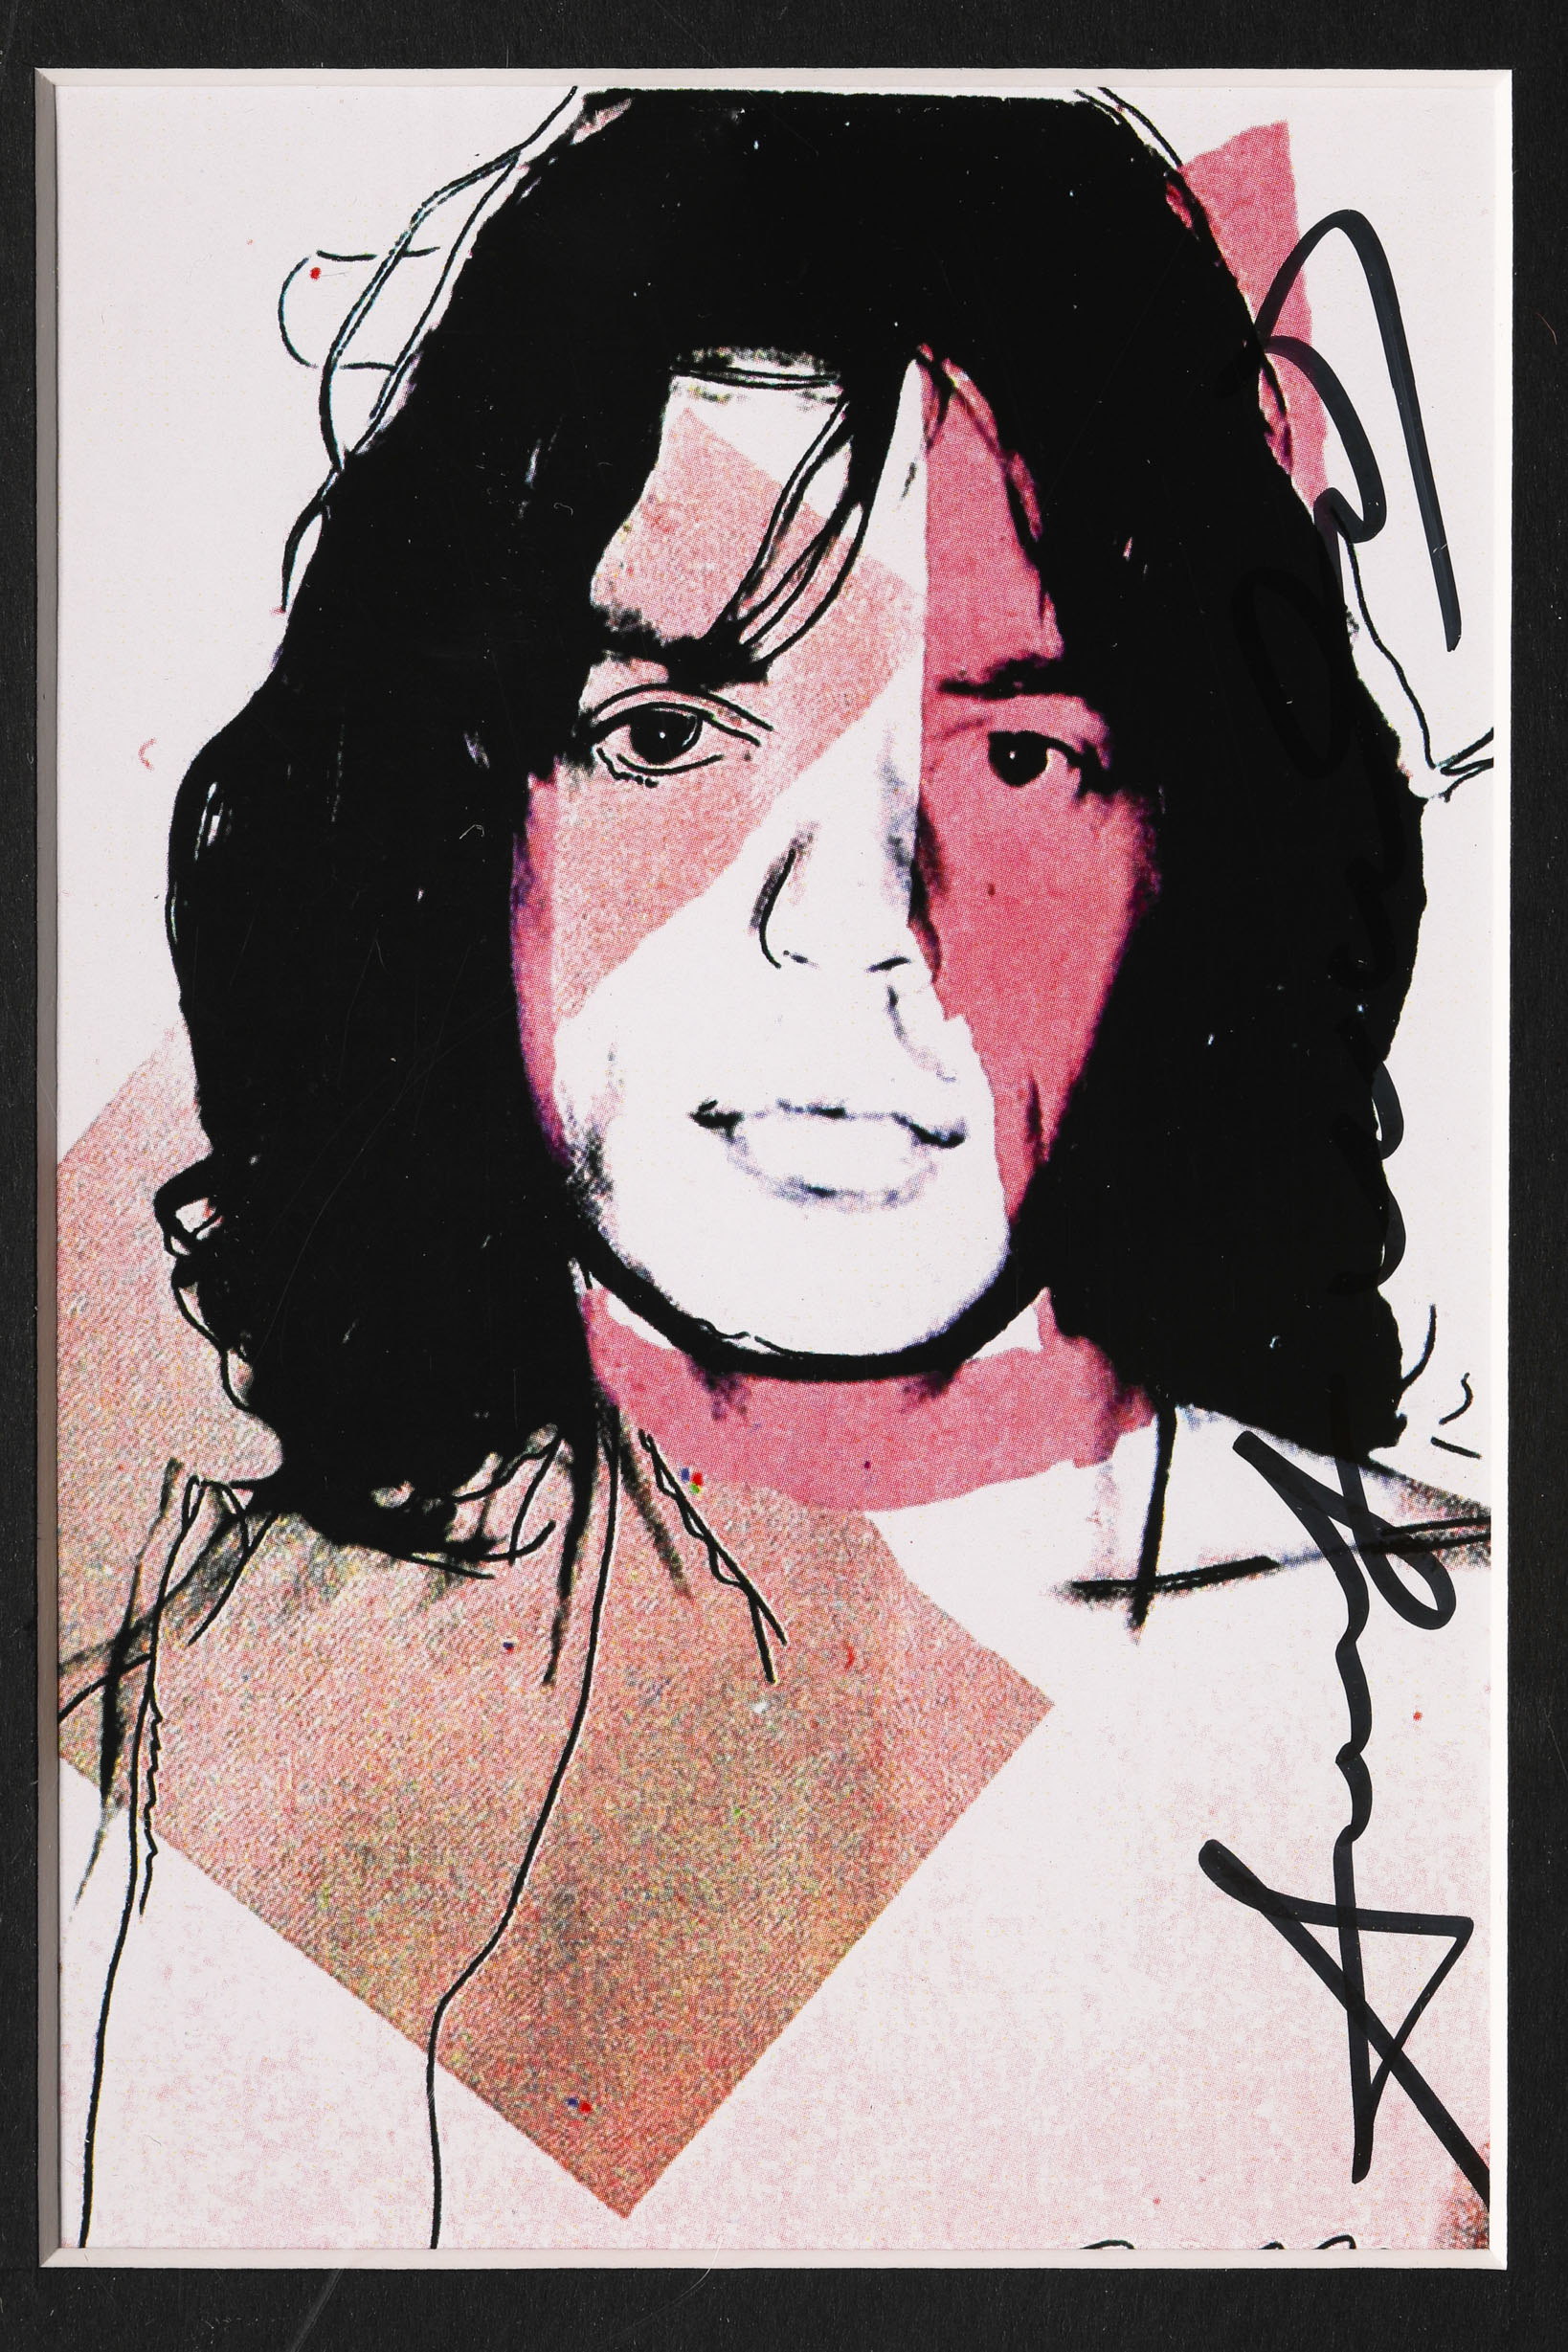 Andy Warhol, Mini Portfolio Mick Jagger with 10 Prints, 1975, signed - Image 10 of 16